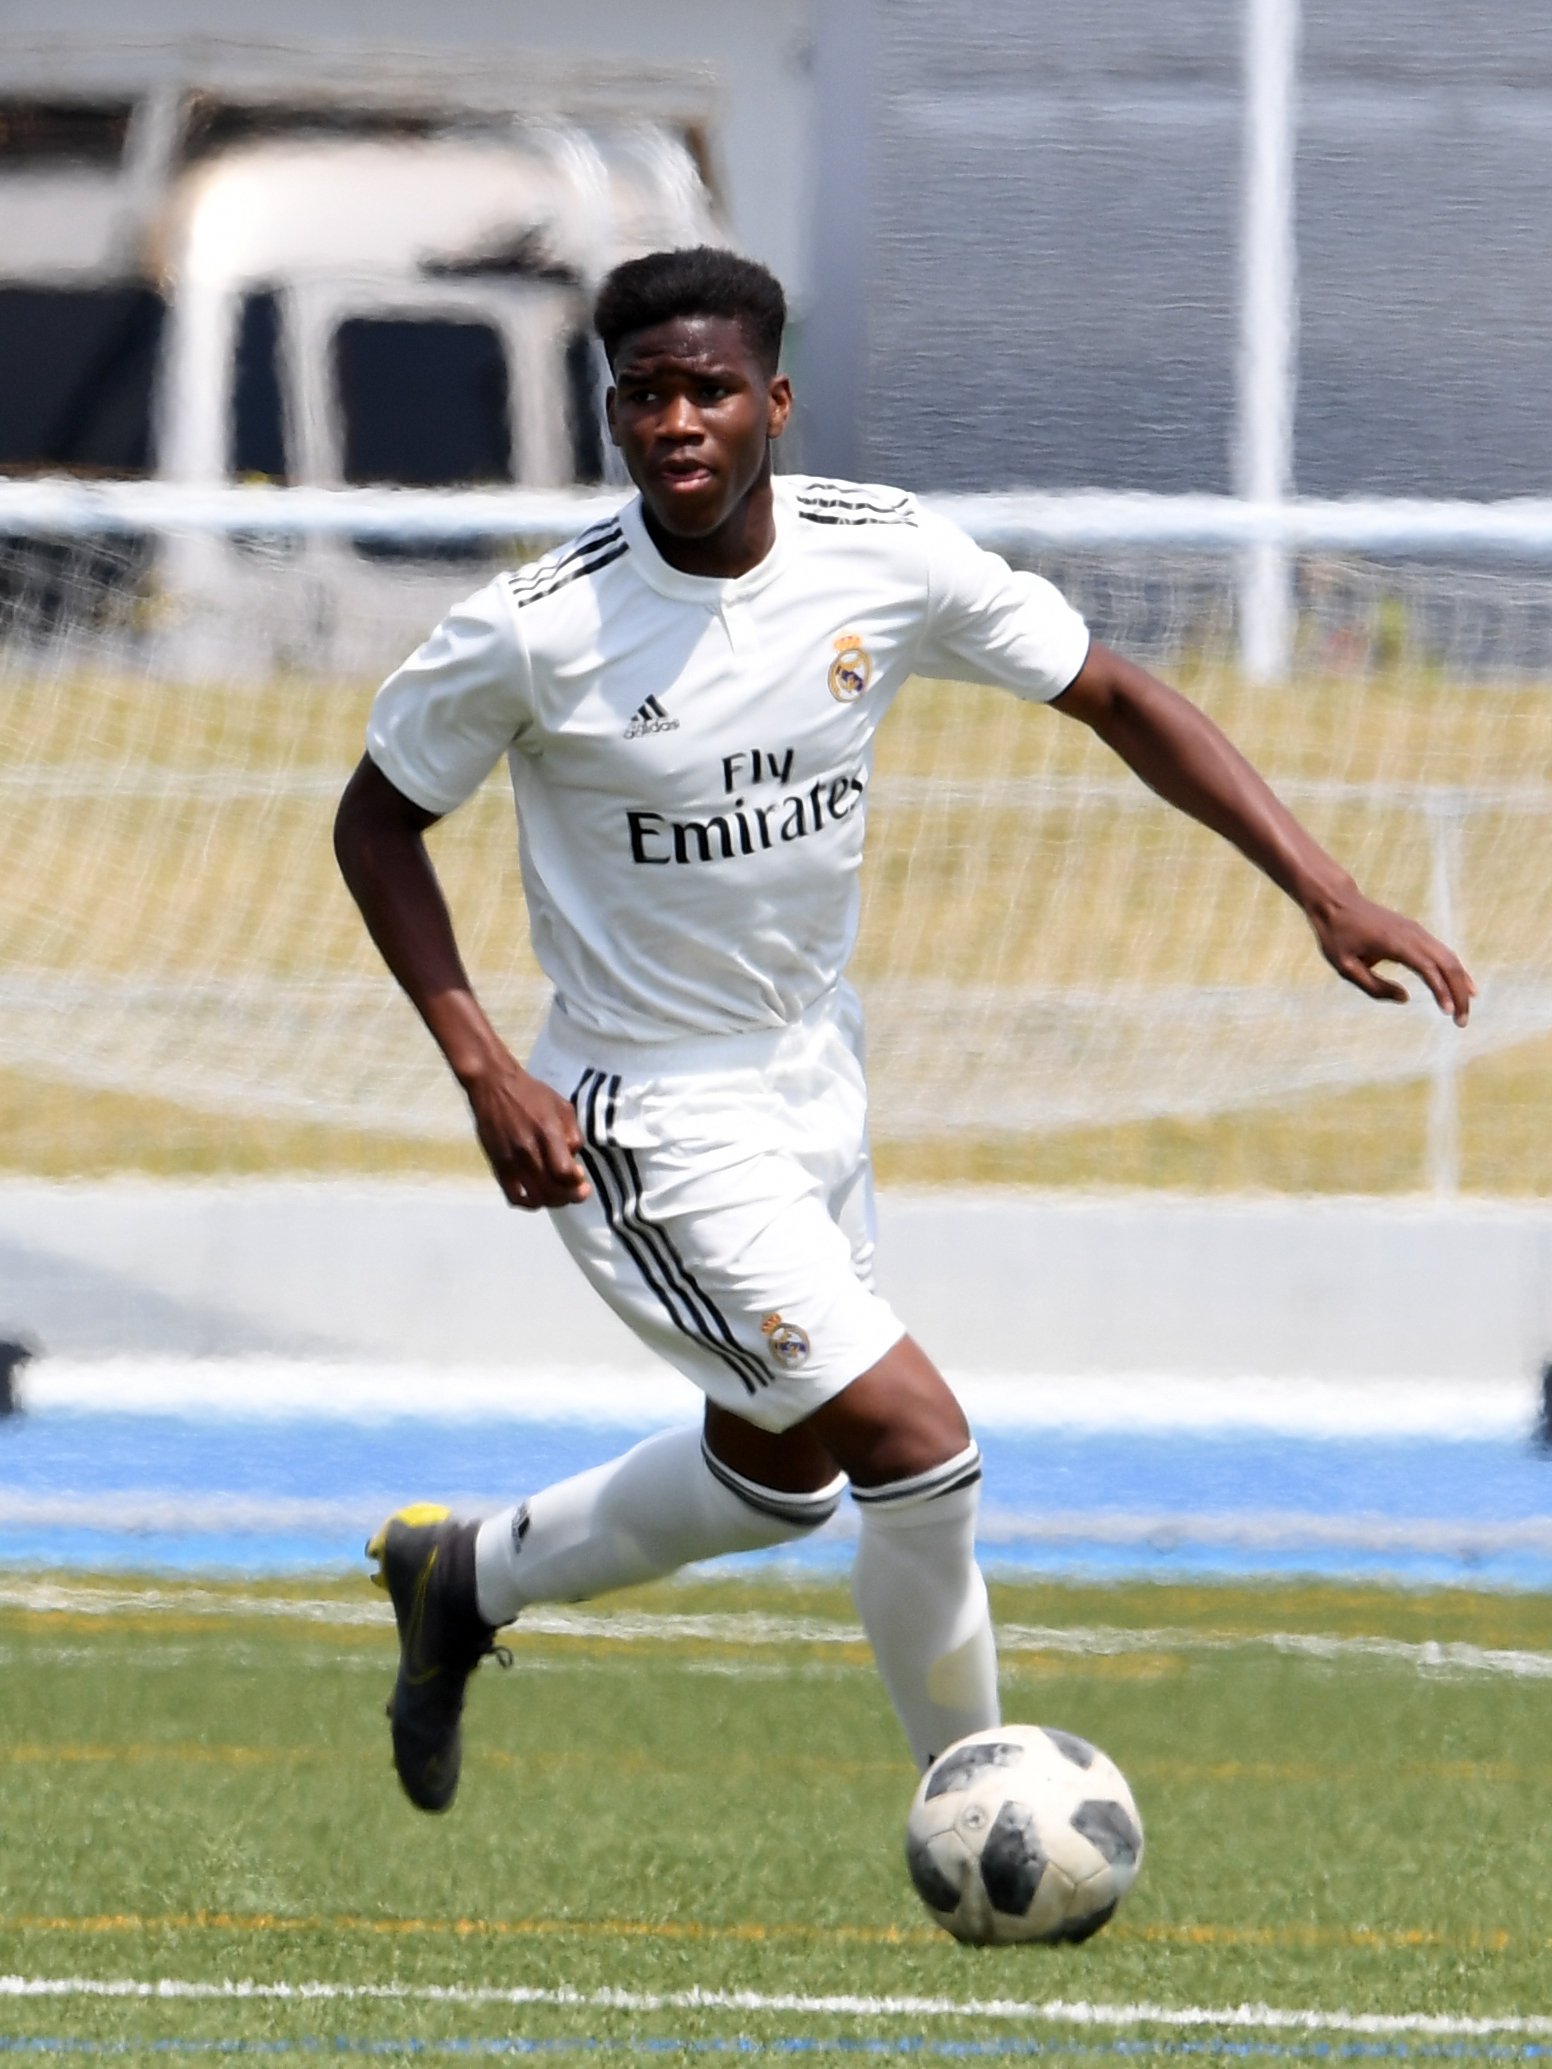 Manchester United are scouting Marvelous Antolin Garzon amidst his eye-catching performances with Real Madrid's academy and U-19 side. (Twitter/ The Man United Show)